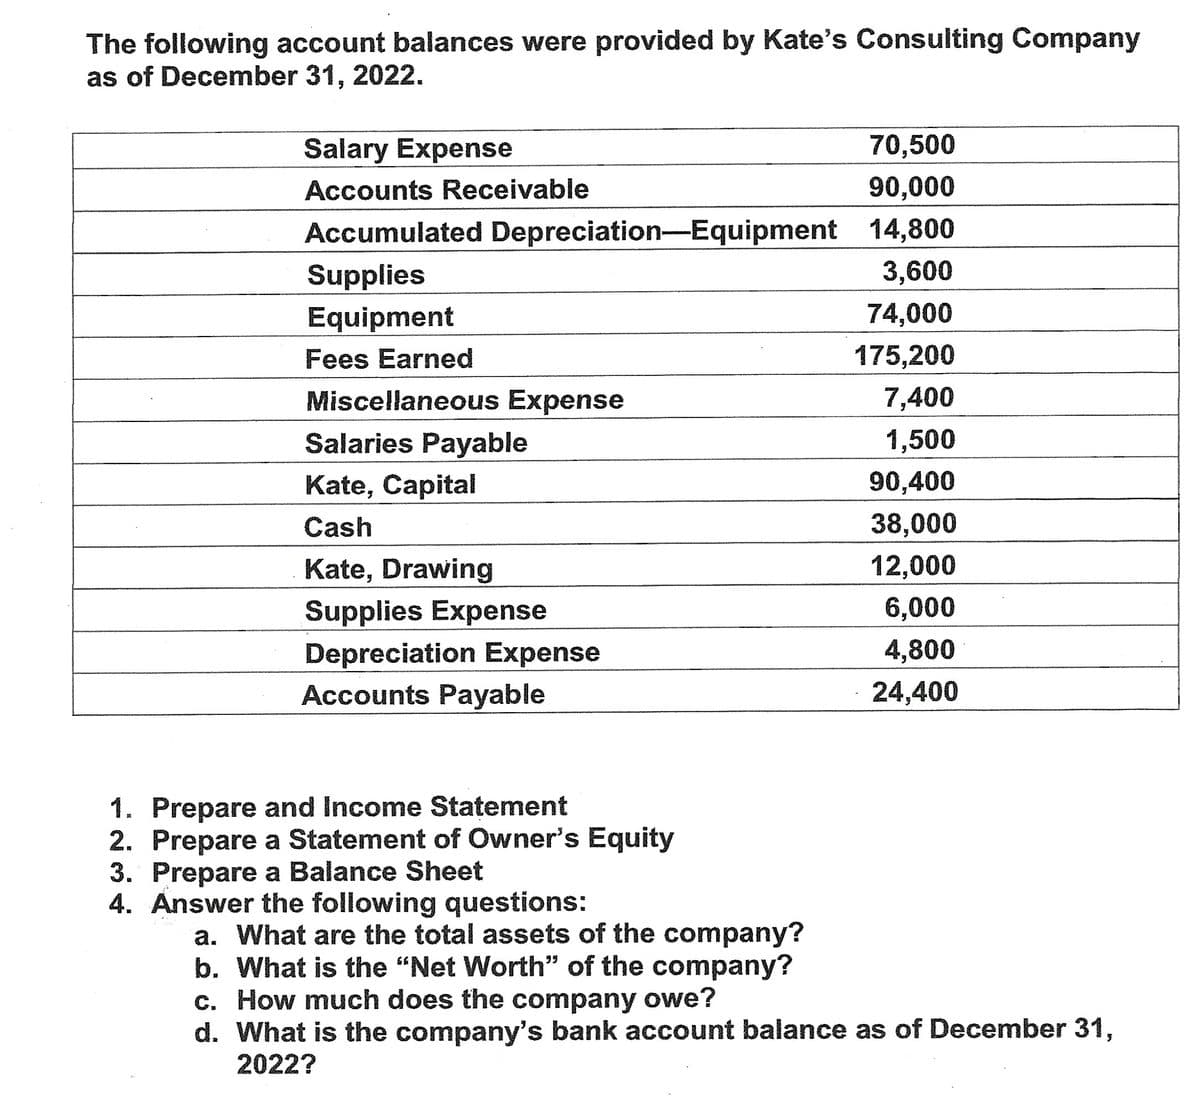 The following account balances were provided by Kate's Consulting Company
as of December 31, 2022.
Salary Expense
70,500
Accounts Receivable
90,000
Accumulated Depreciation-Equipment 14,800
Supplies
Equipment
3,600
74,000
Fees Earned
175,200
Miscellaneous Expense
7,400
Salaries Payable
1,500
Kate, Capital
90,400
Cash
38,000
12,000
Kate, Drawing
Supplies Expense
Depreciation Expense
Accounts Payable
5.
6,000
4,800
24,400
1. Prepare and Income Statement
2. Prepare a Statement of Owner's Equity
3. Prepare a Balance Sheet
4. Answer the following questions:
a. What are the total assets of the company?
b. What is the "Net Worth" of the company?
c. How much does the company owe?
d. What is the company's bank account balance as of December 31,
2022?
